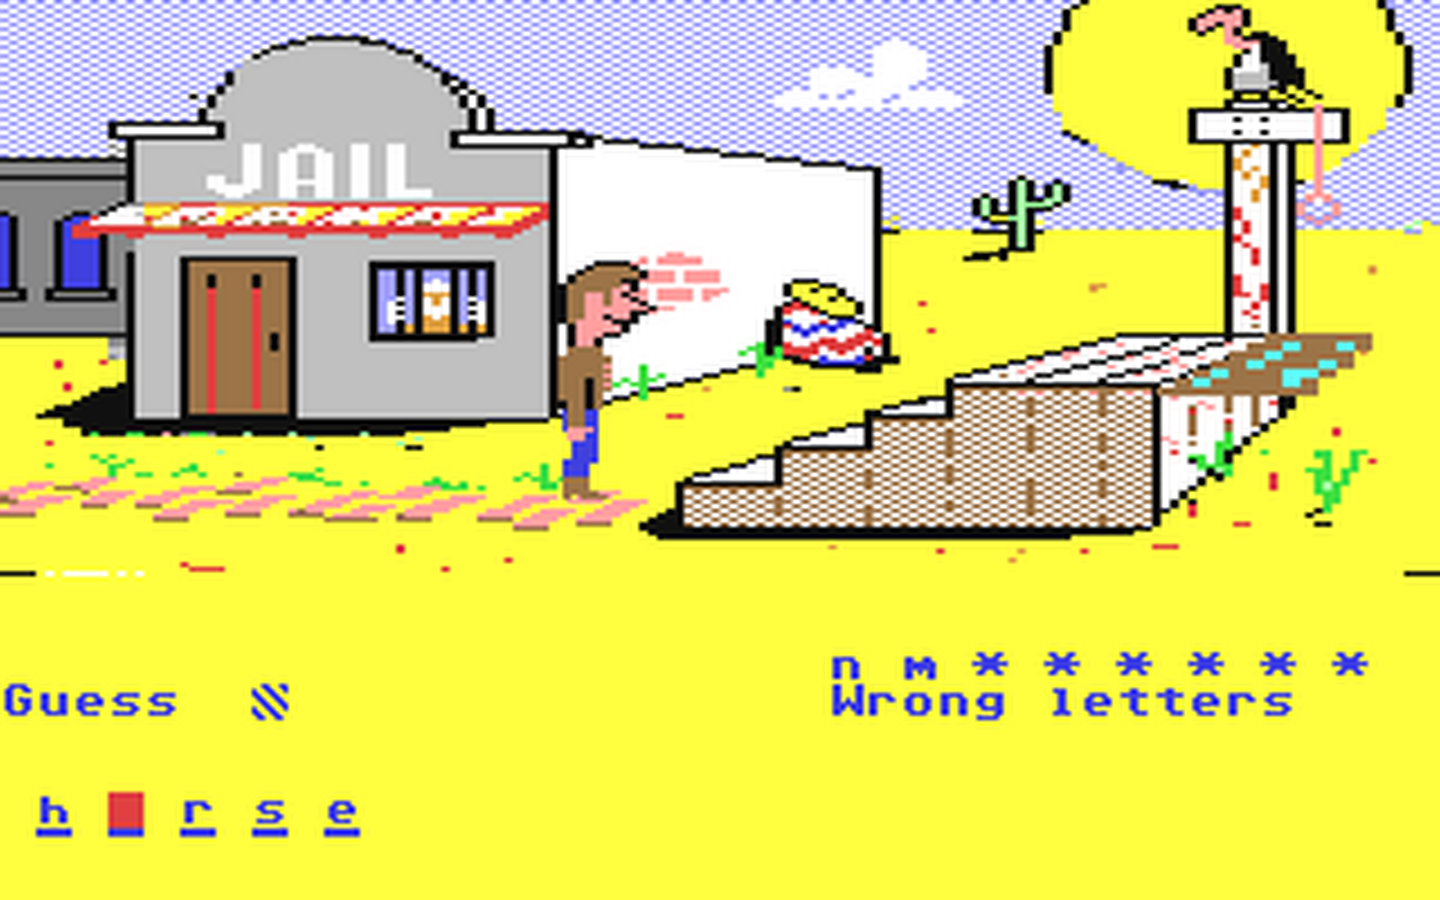 C64 GameBase Spell_Now Access_Software 1984